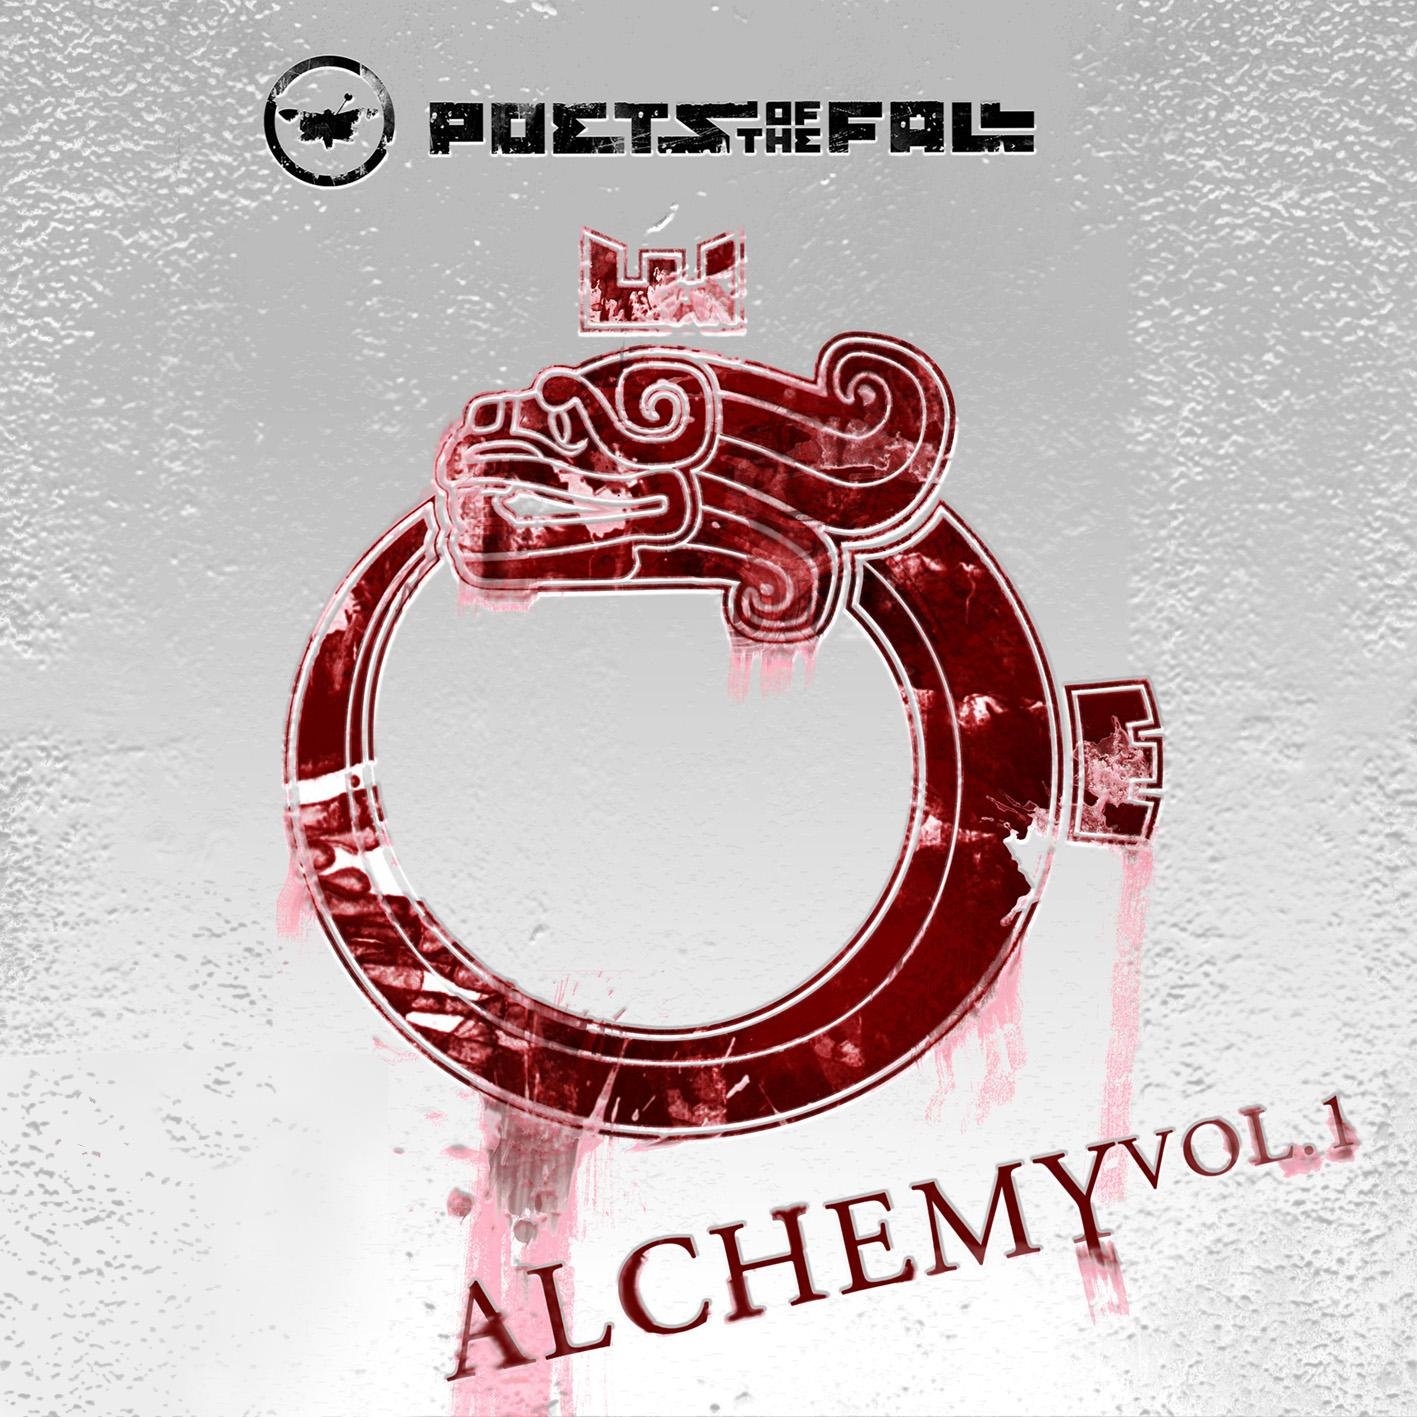 Poets Of The Fall - Alchemy Vol. 1 (2011) [FLAC] Download